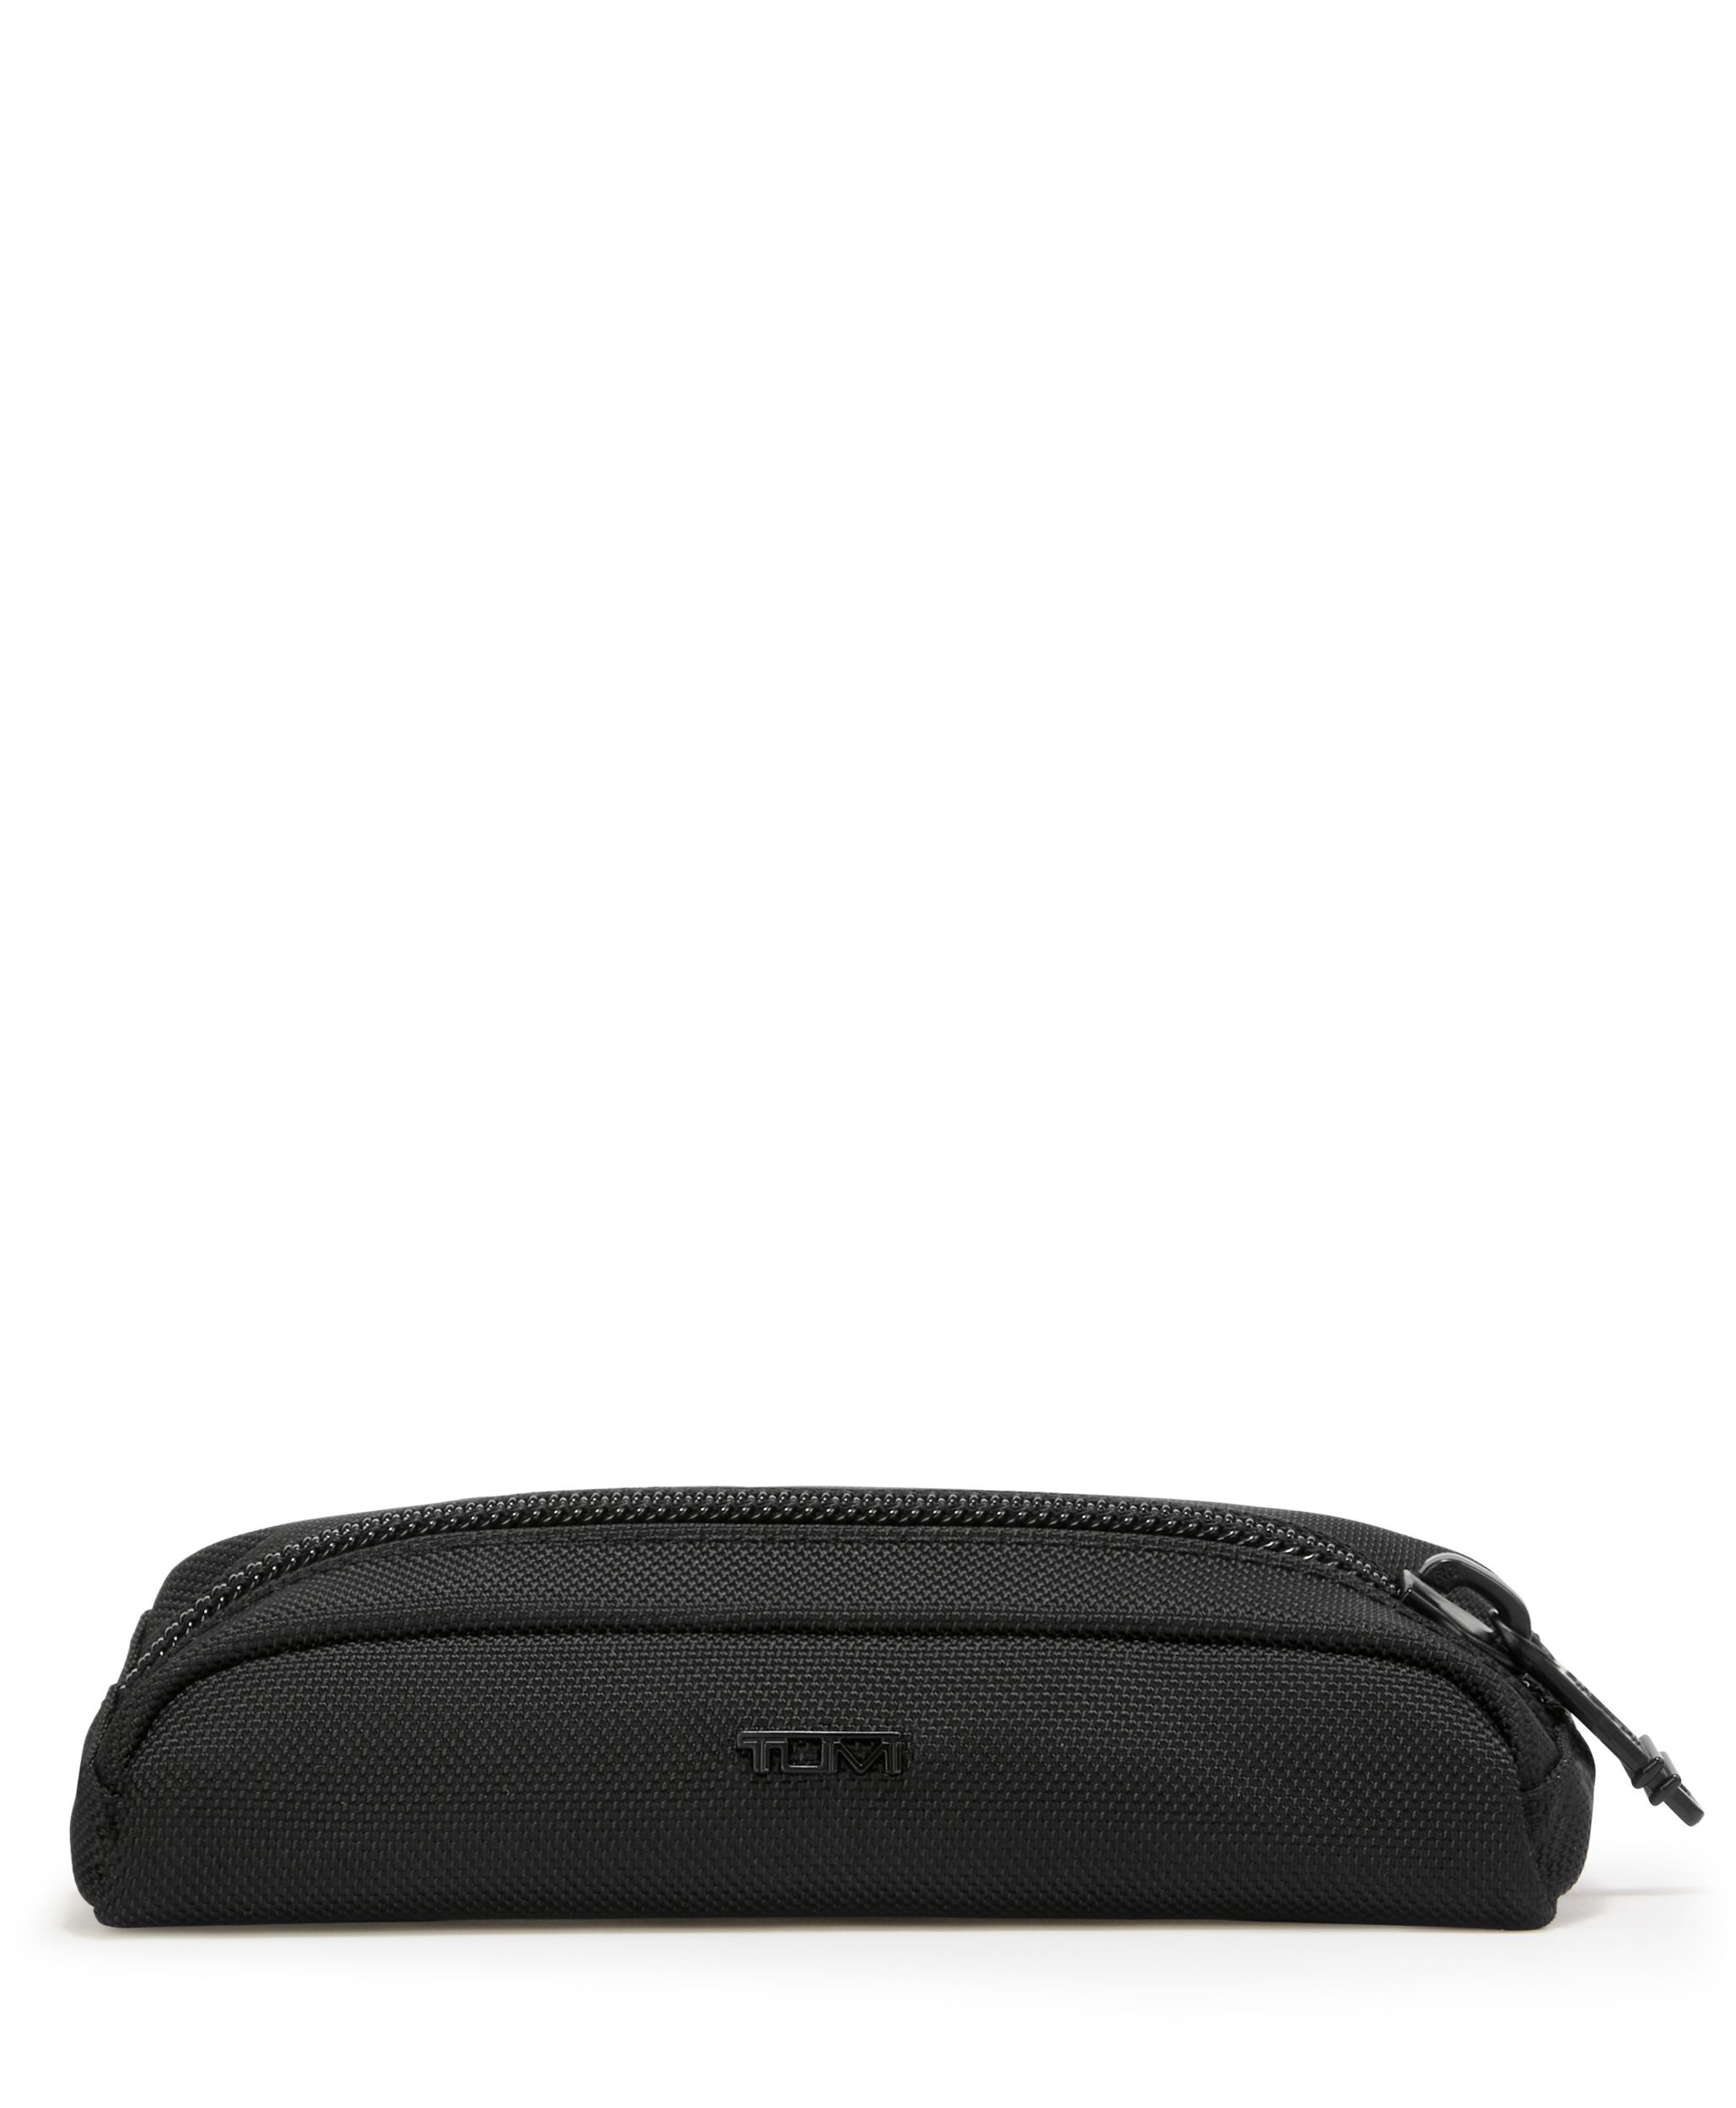 Tumi Silver Small Hard Case Travel Case with travel size ascessories.  SM2379 | Travel size products, Travel case, Tumi